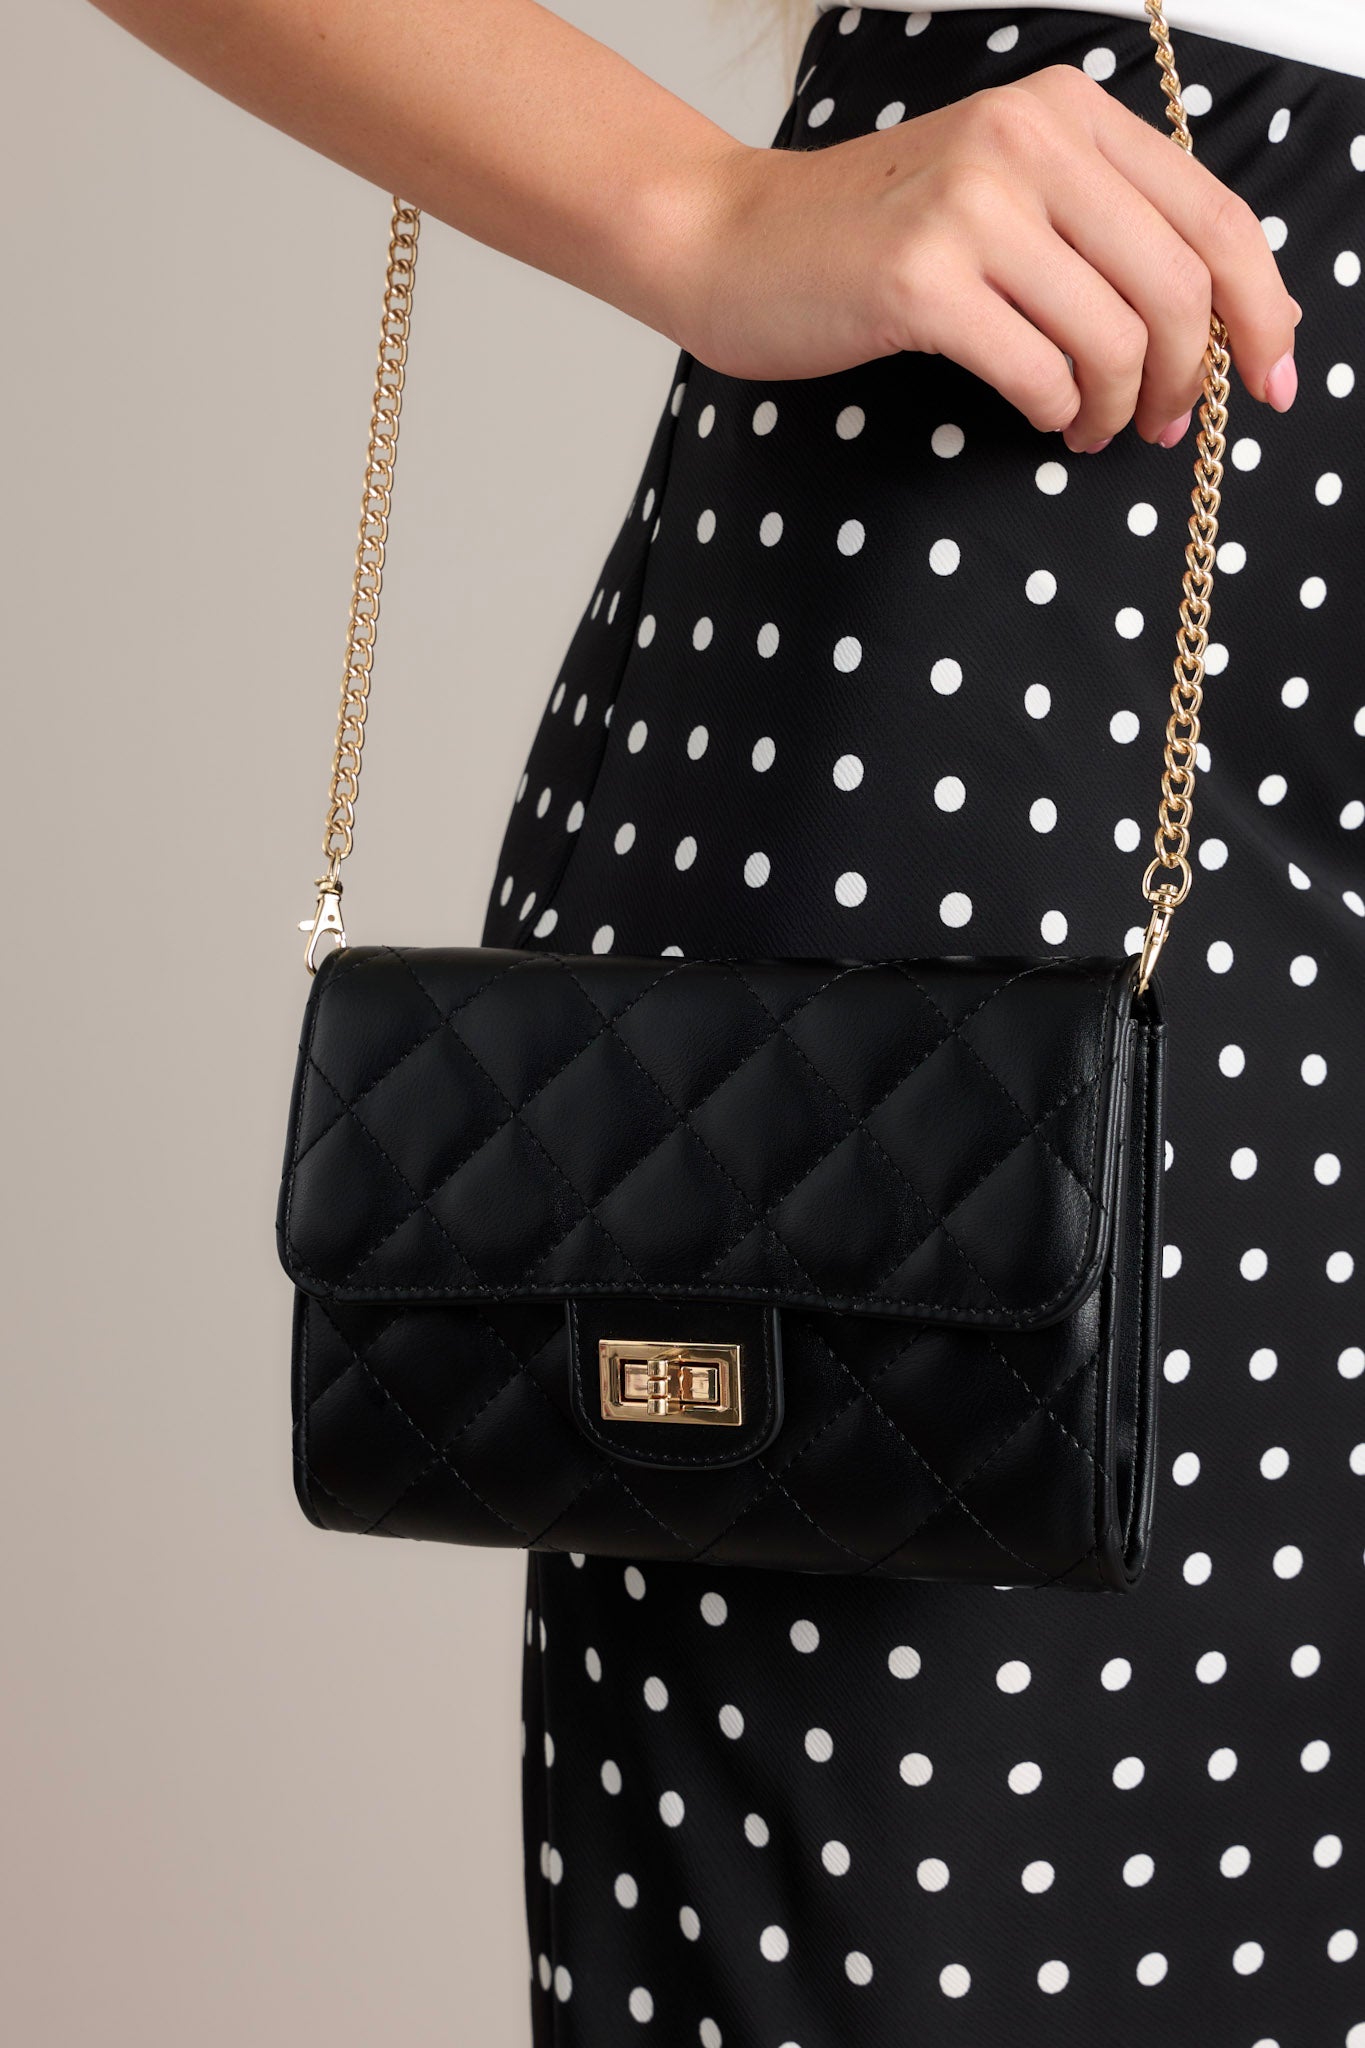 Front view of this black bag that features gold hardware, a quilted design, turn lock closure, a zipper pocket inside, and a detachable chain shoulder strap.